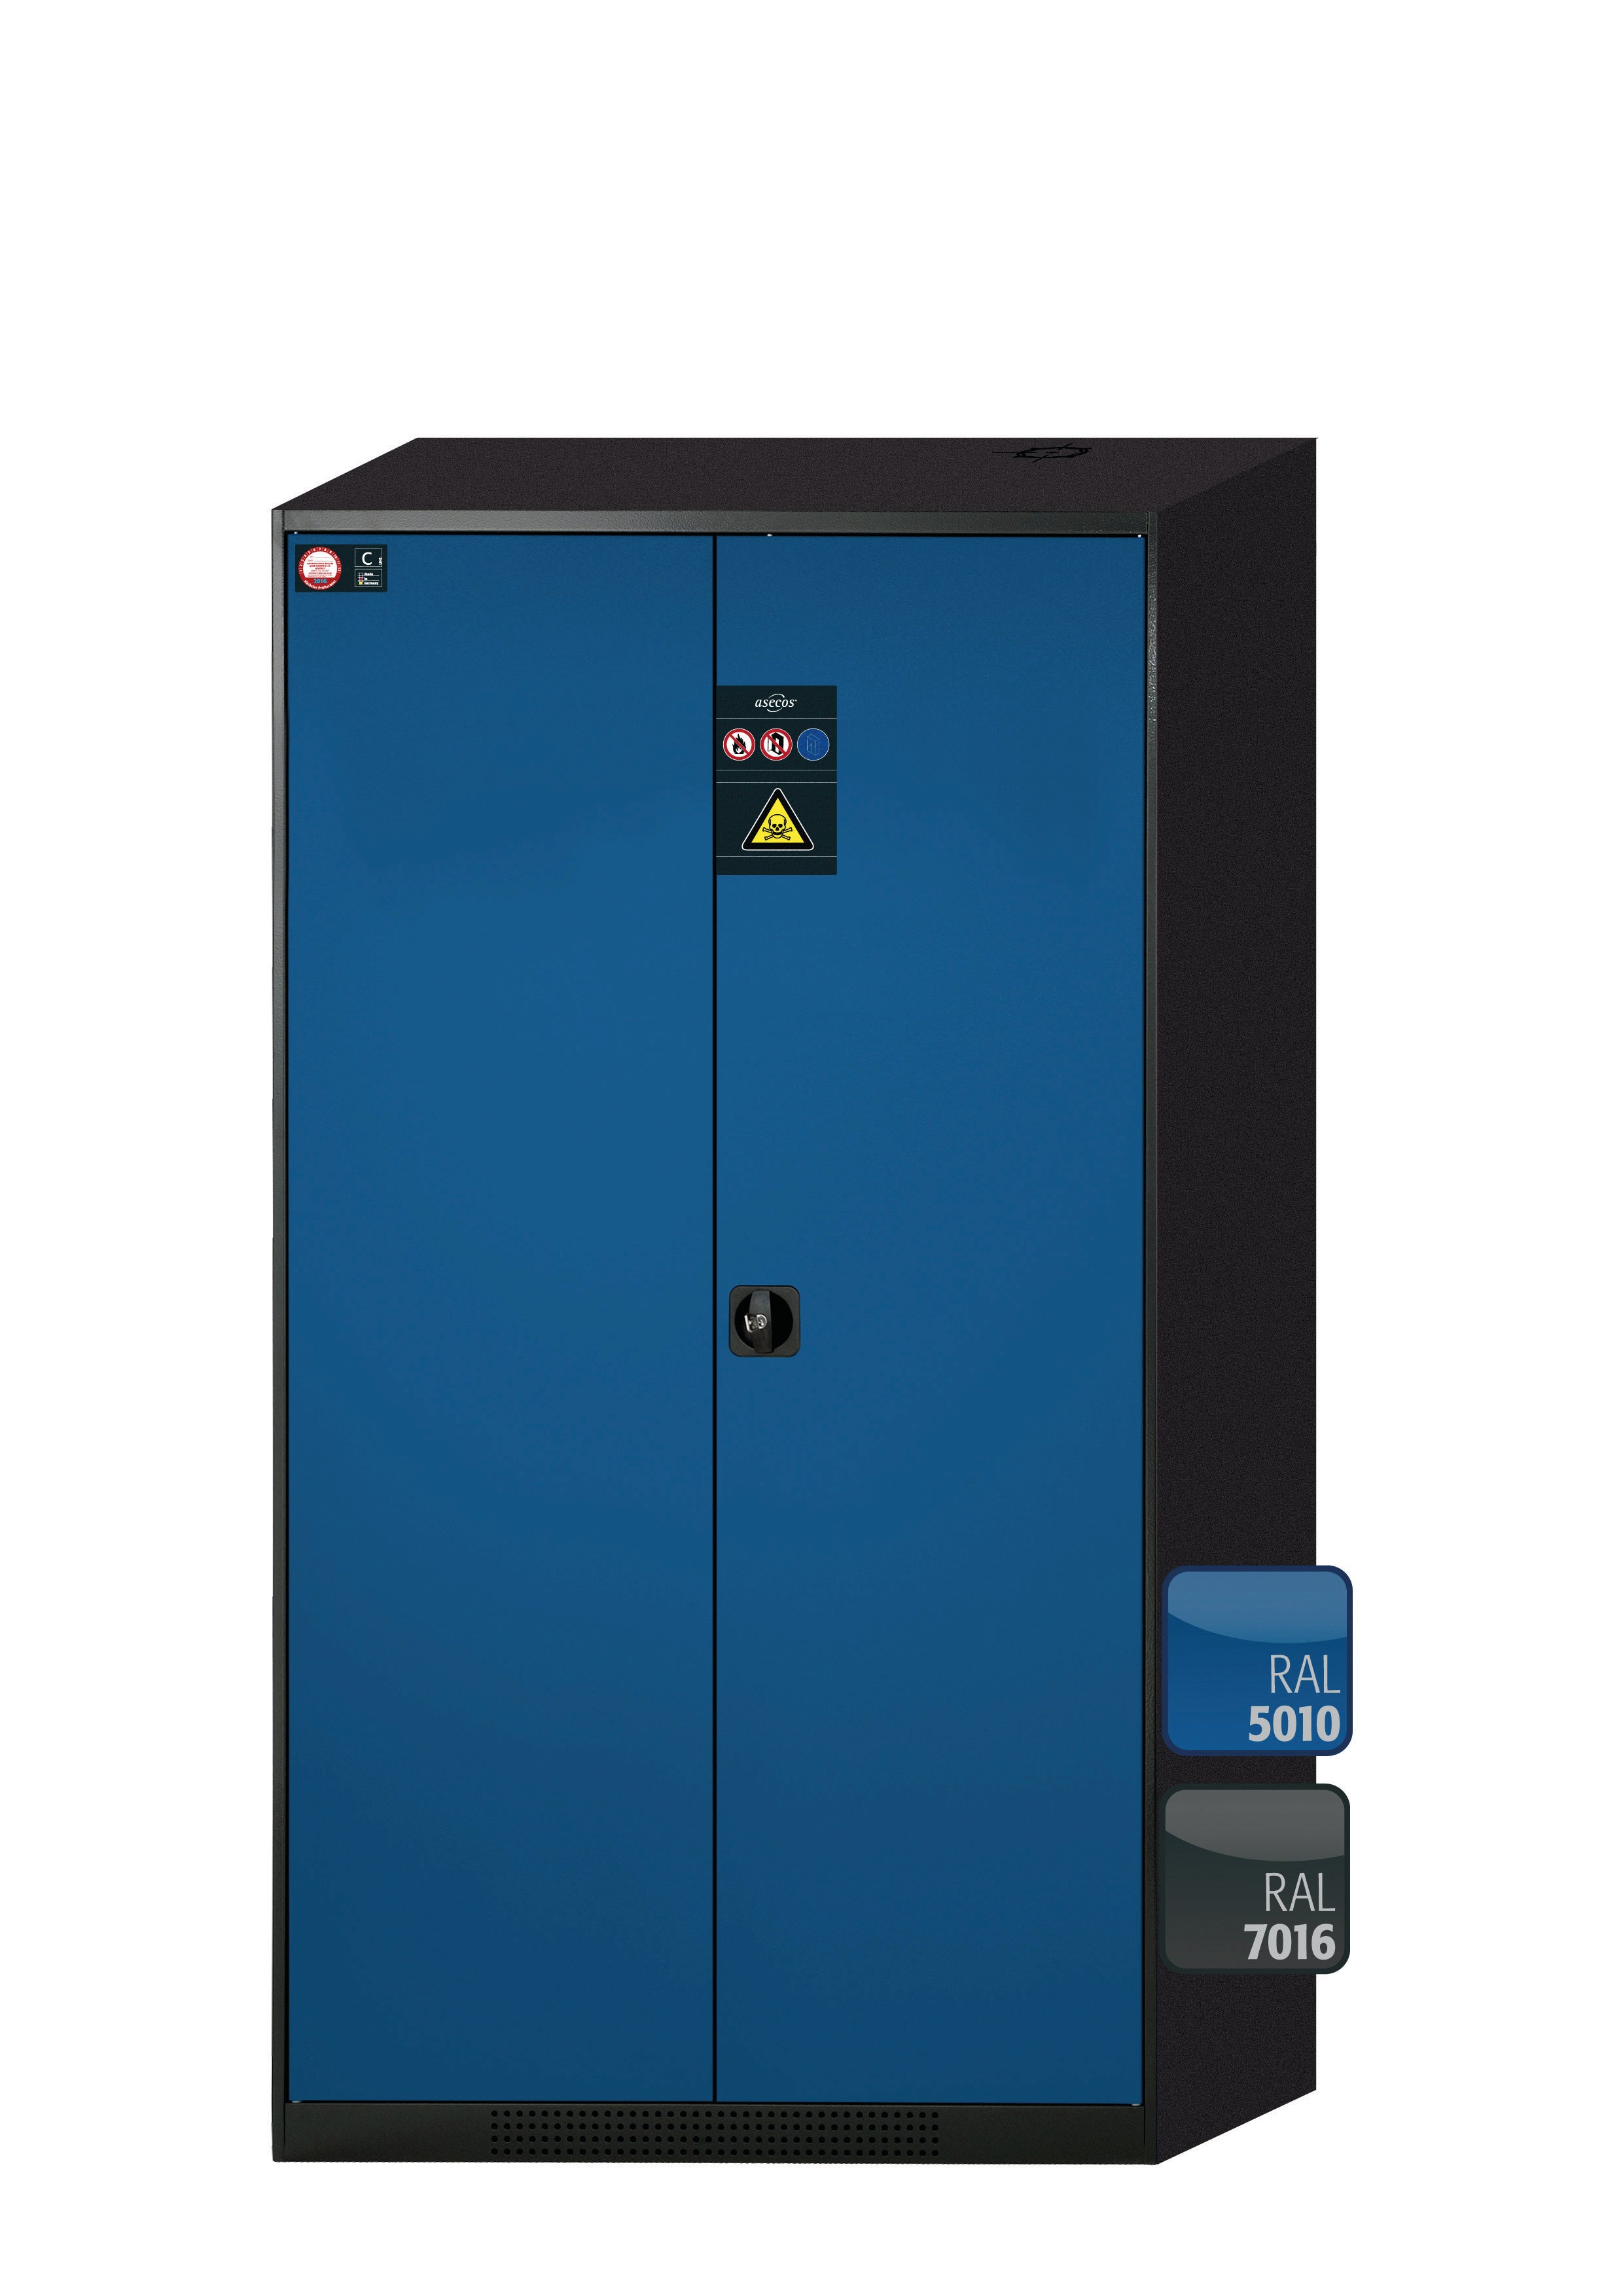 Chemical cabinet CS-CLASSIC model CS.195.105 in gentian blue RAL 5010 with 5x AbZ pull-out shelves (sheet steel/polypropylene)